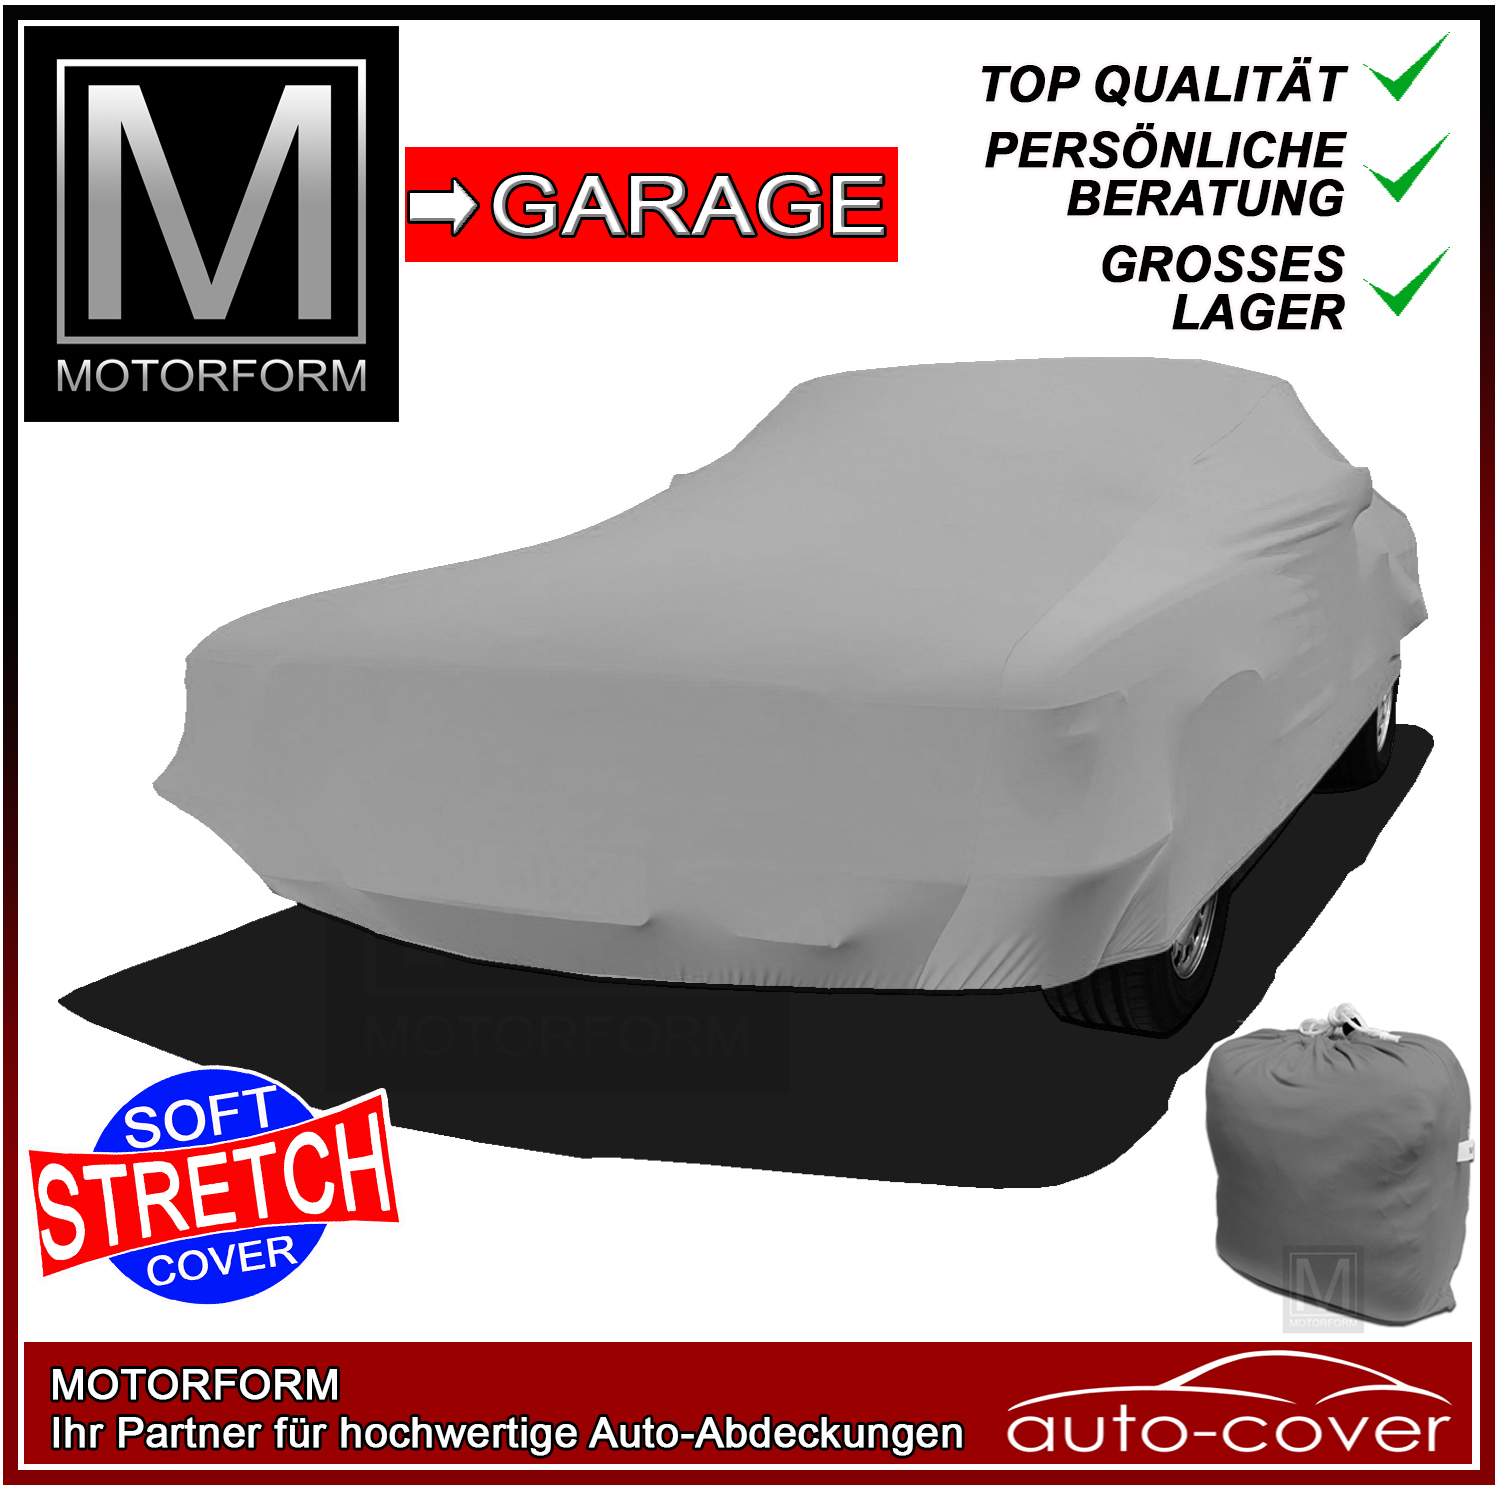 Grey Super Stretchy Cover for Opel Corsa D (2006-14)